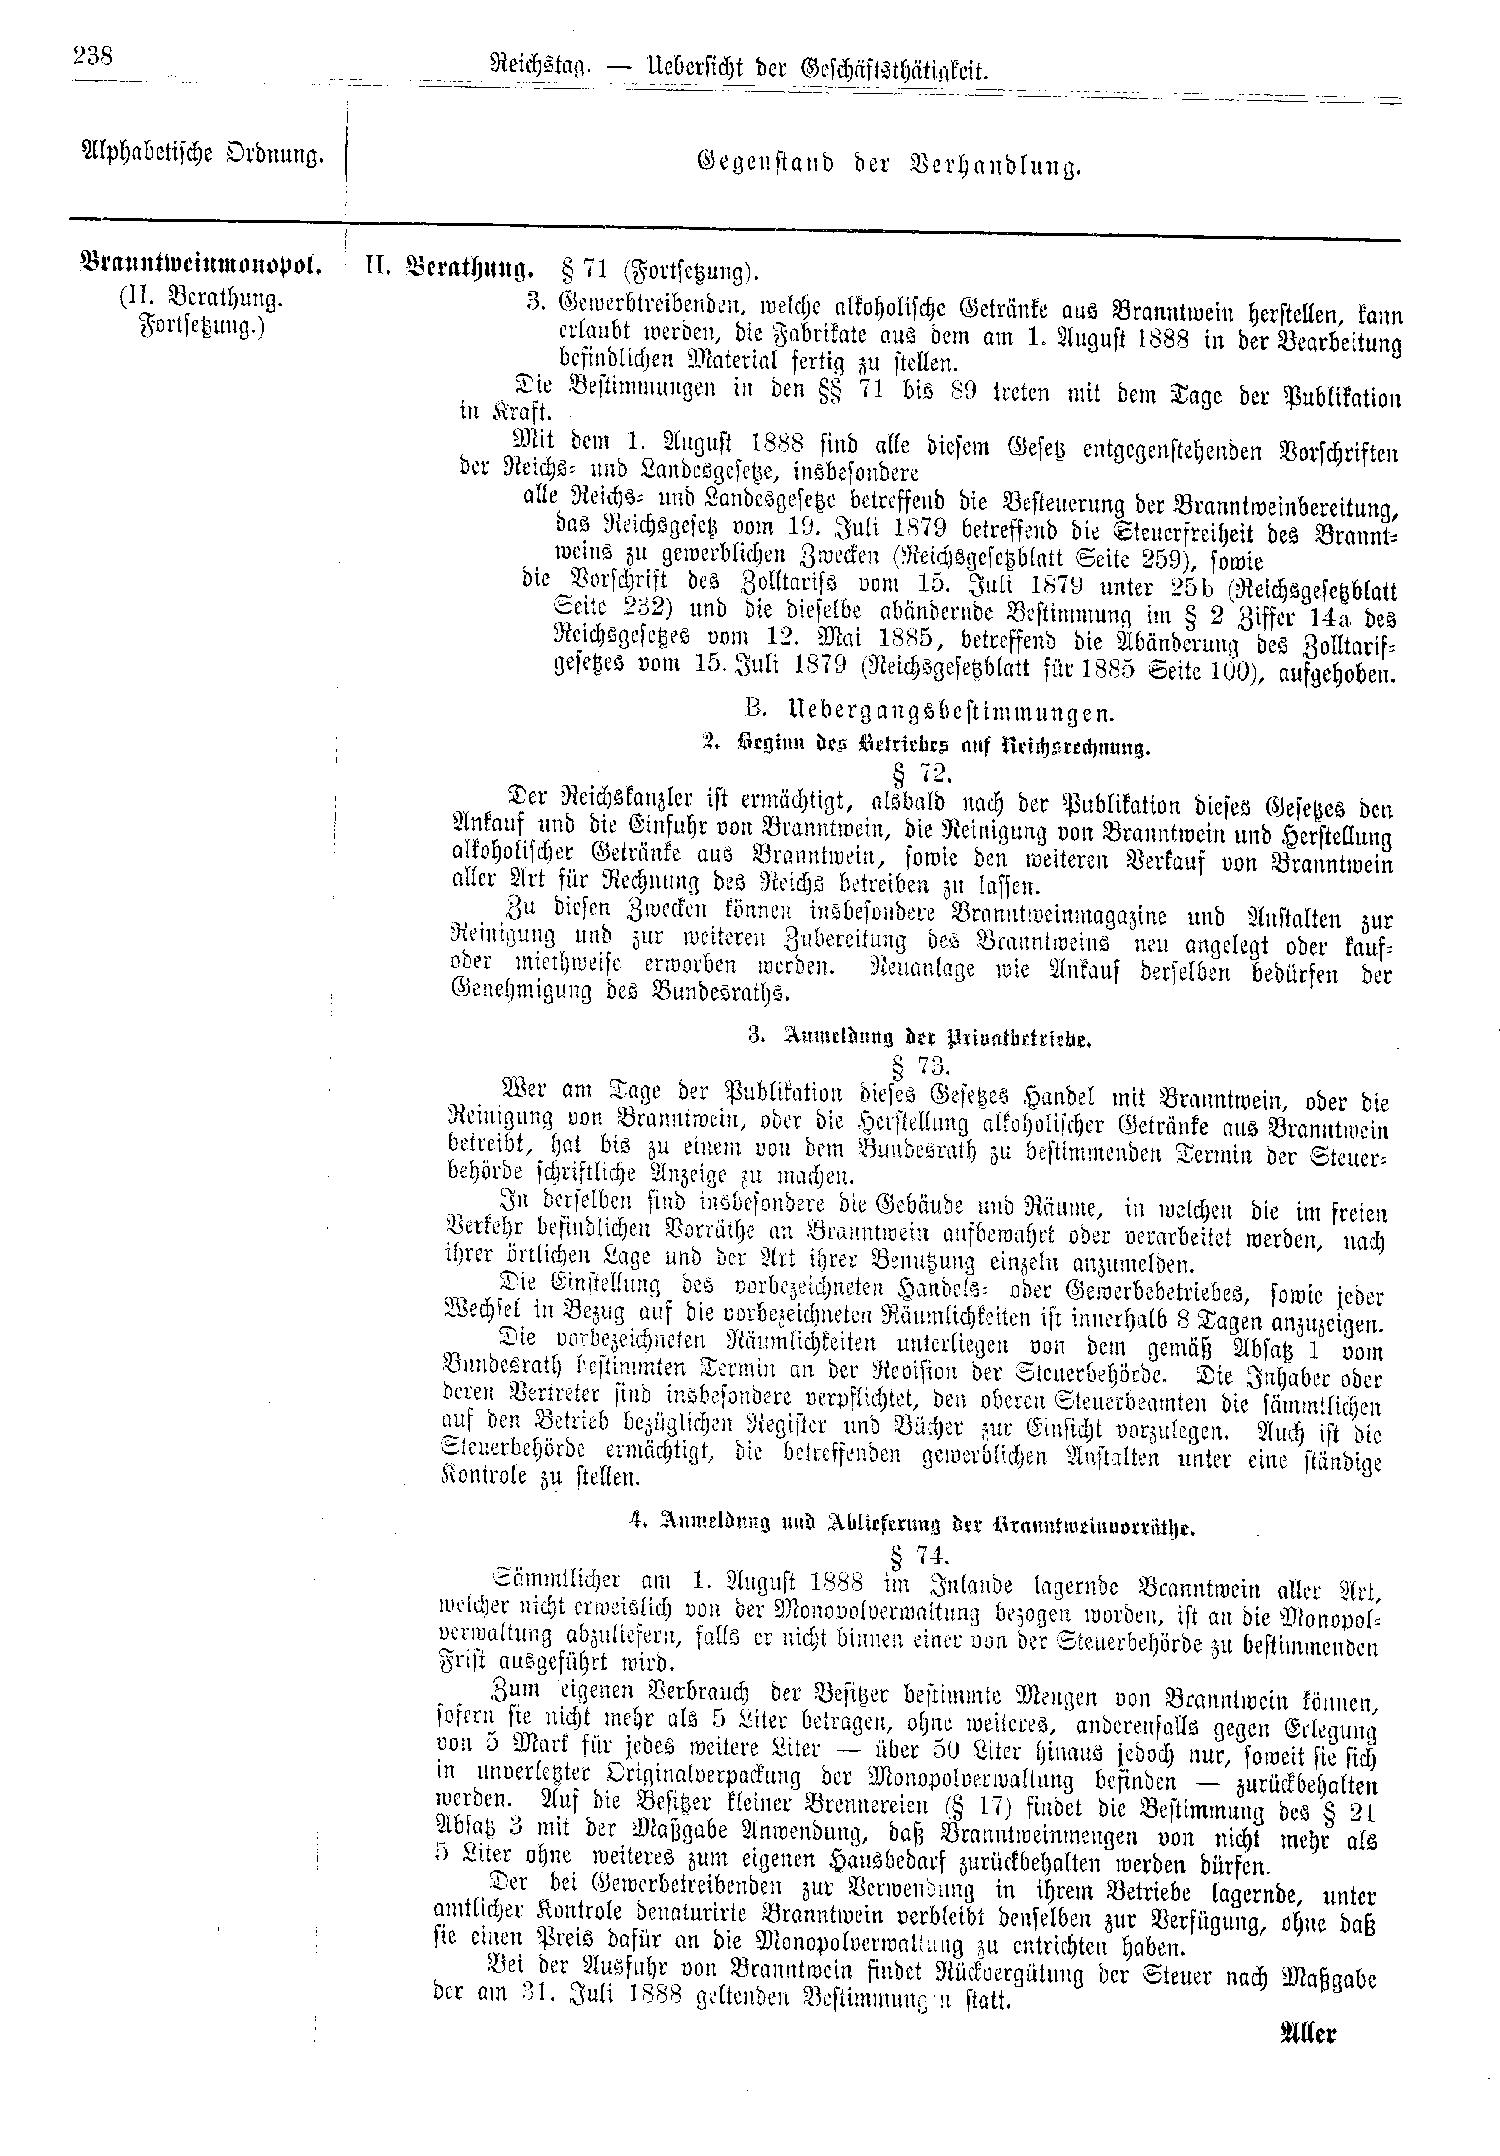 Scan of page 238